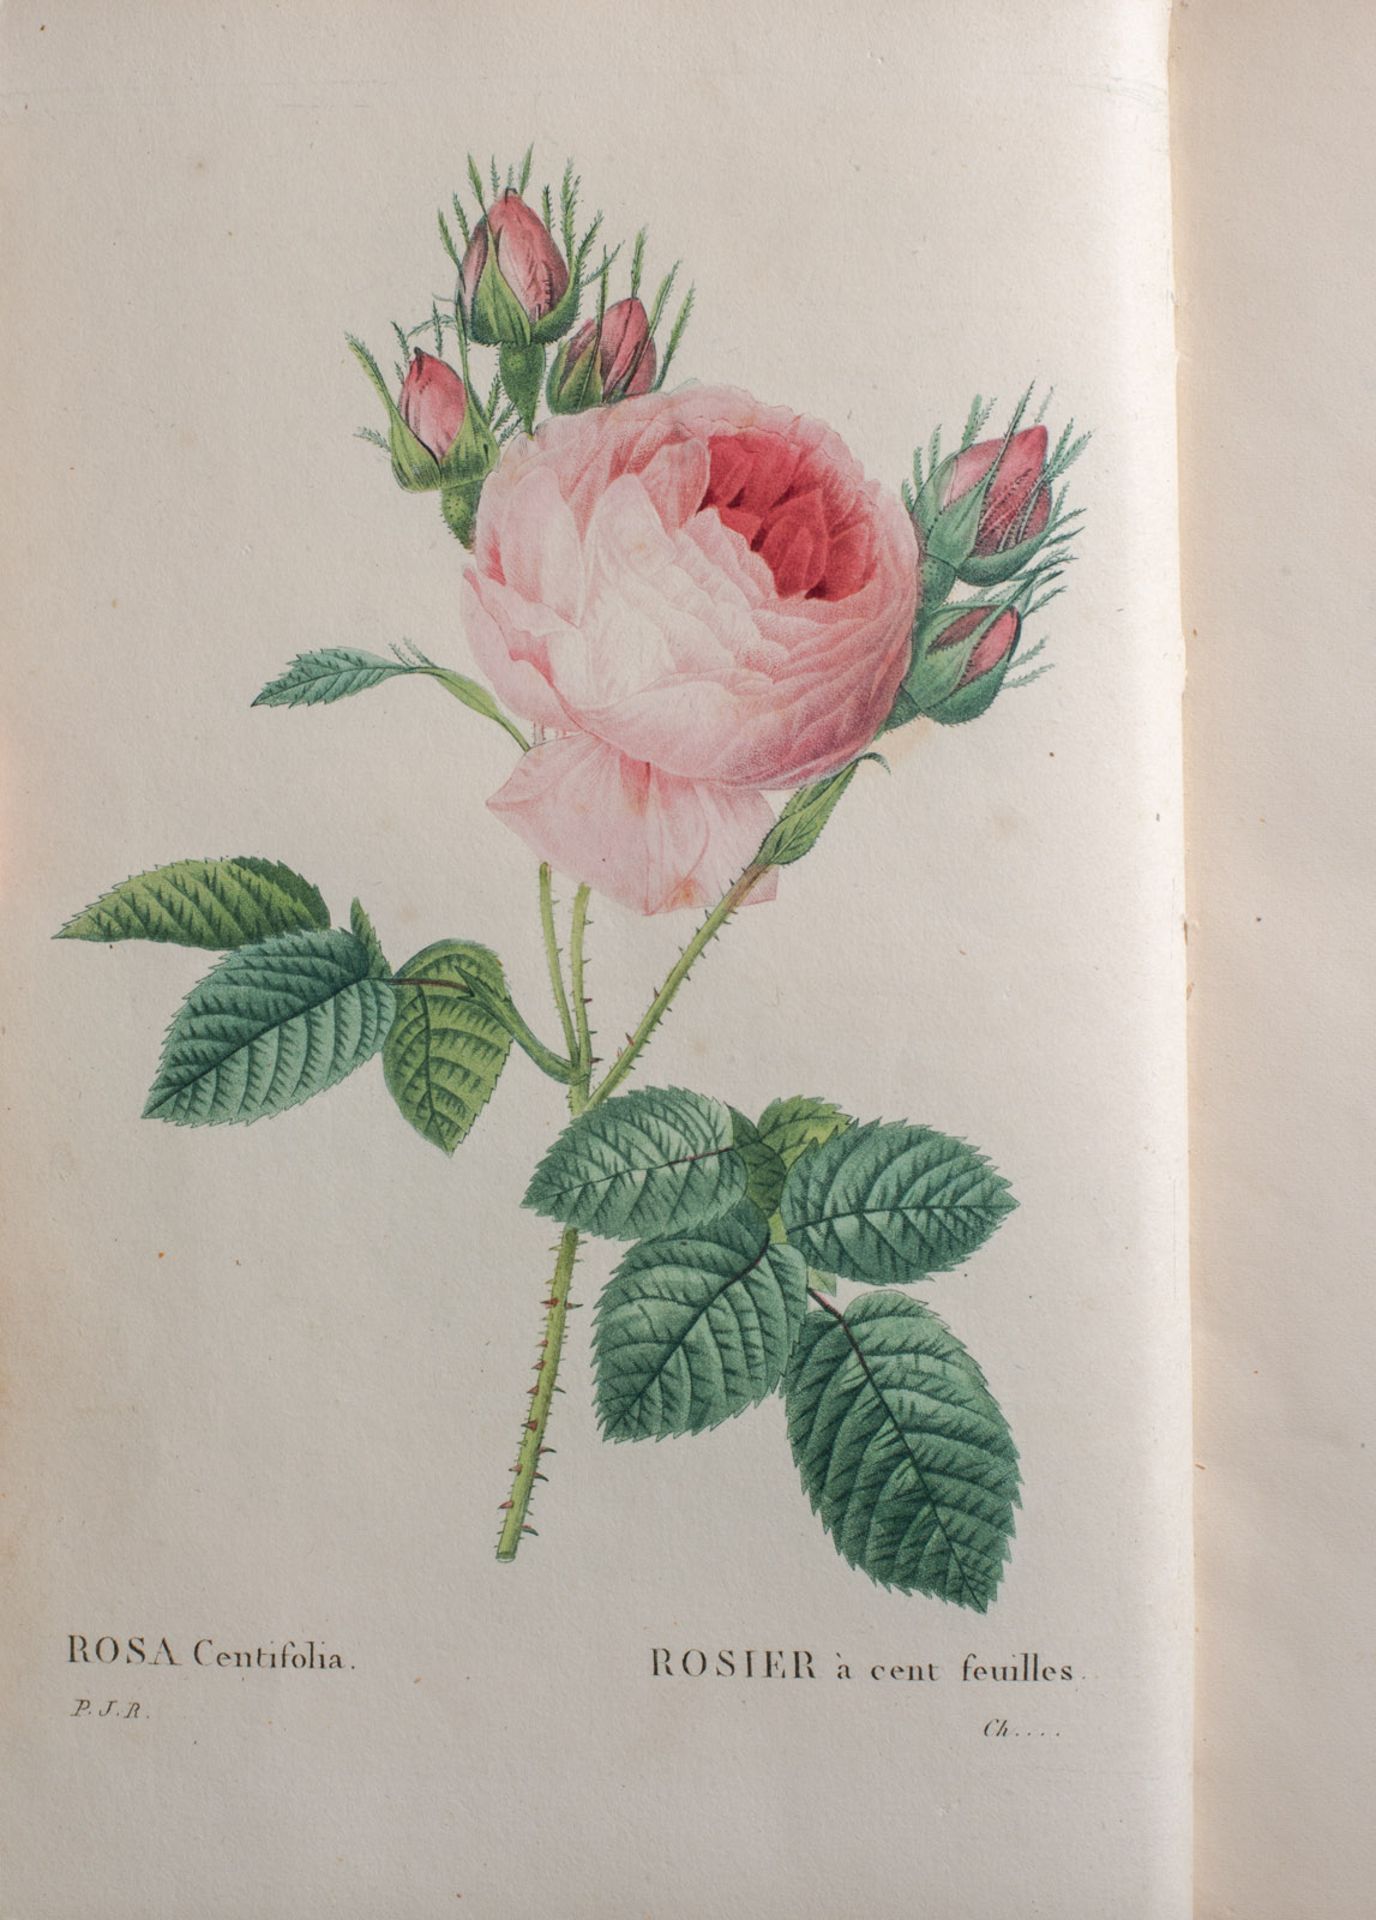 Redoute, P.J., Les Roses - Image 3 of 4